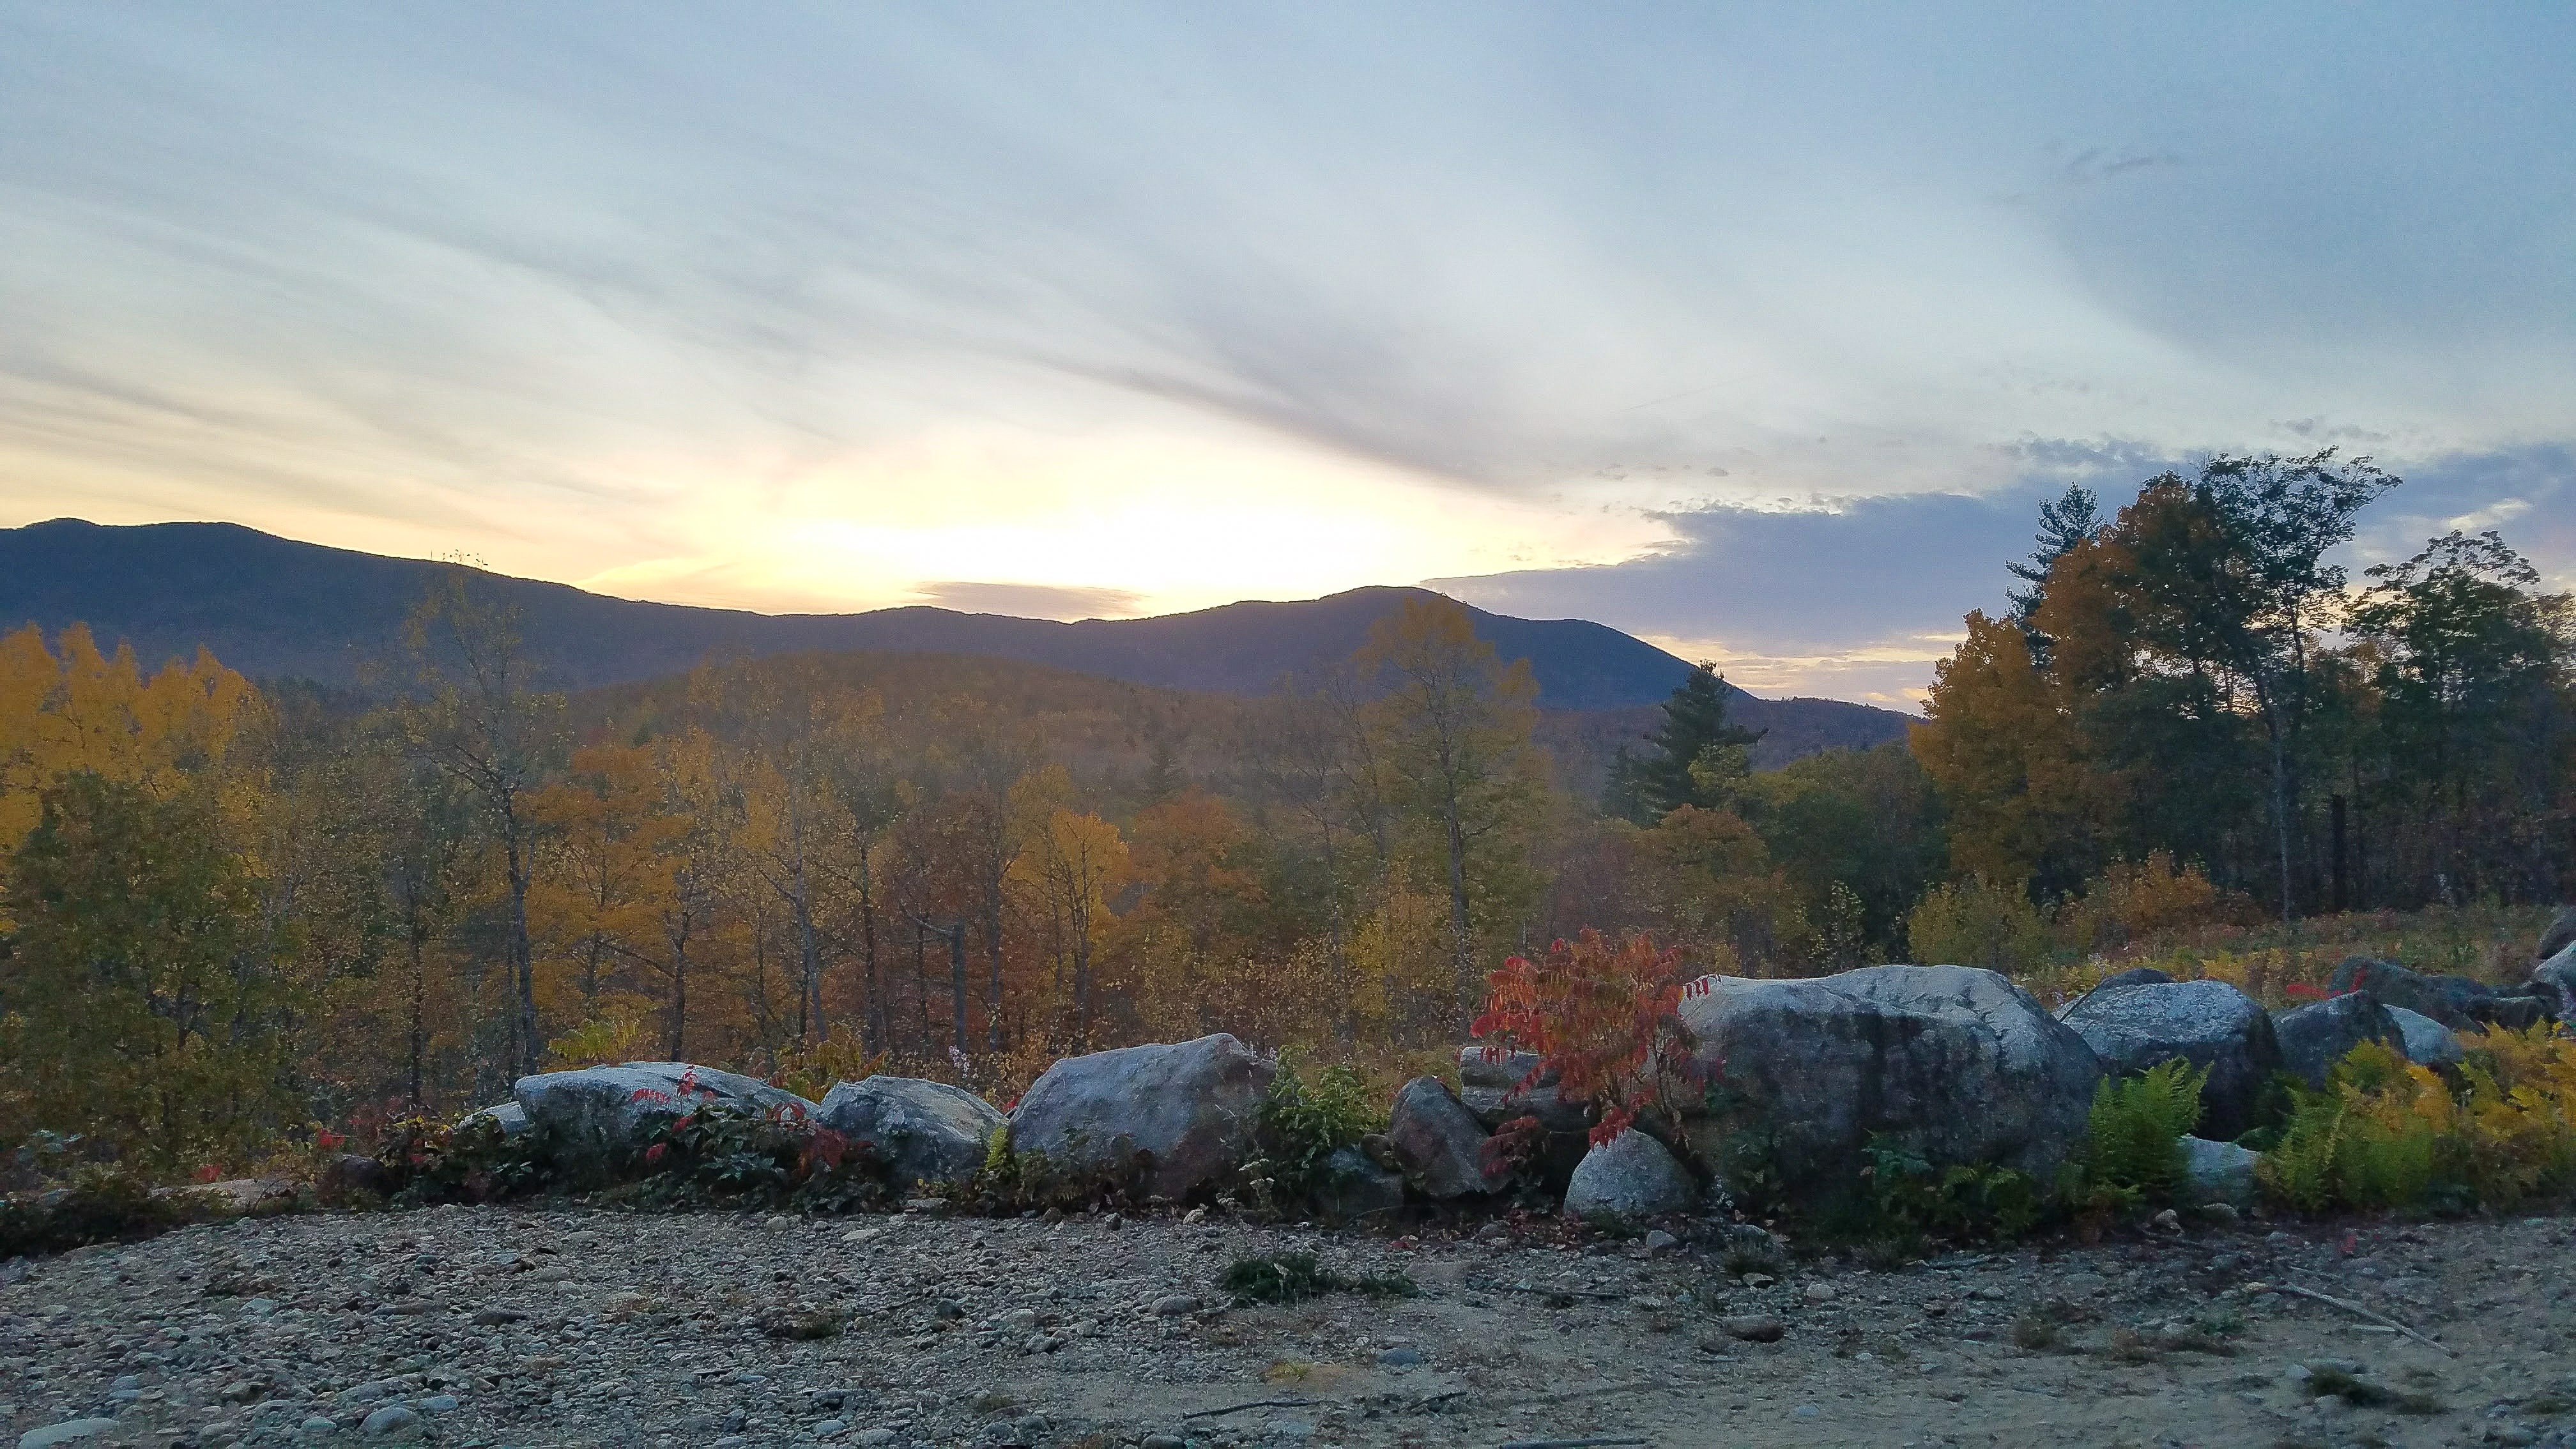 Tumbledown Mountain, Maine, best hikes in Maine, most beautiful hikes in Maine, Fall hikes, New England, Fat Man's Misery